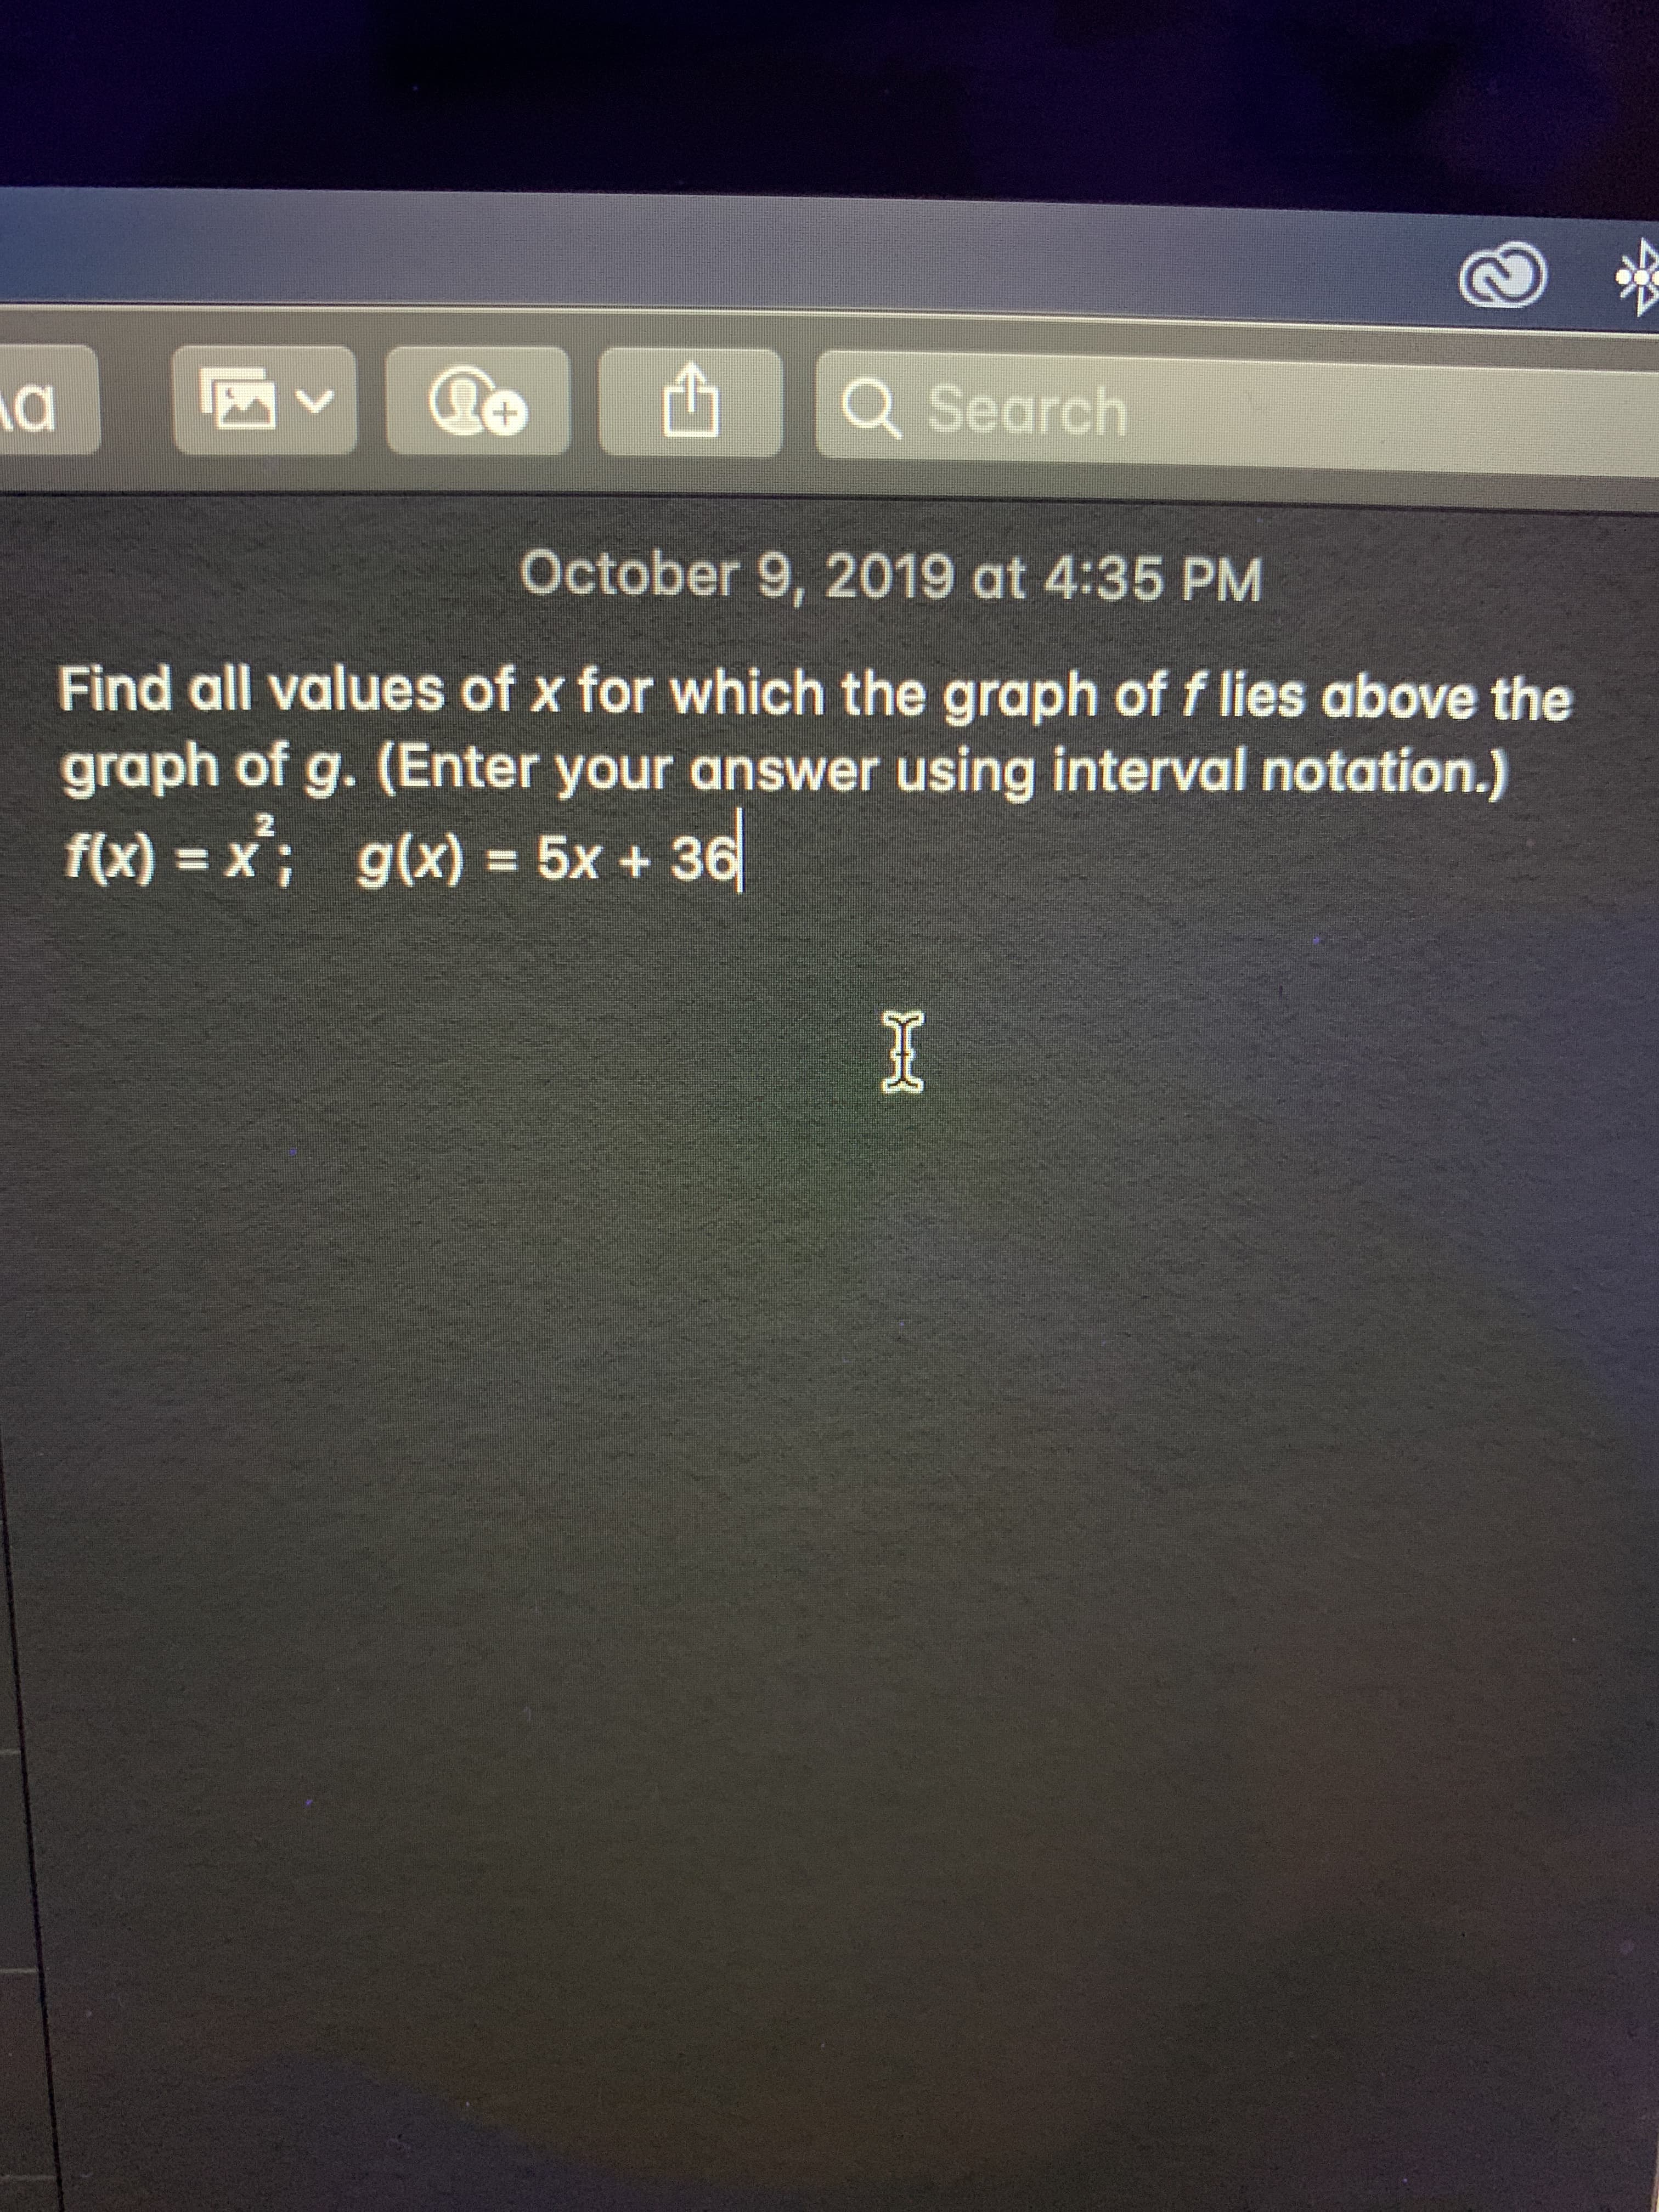 Q Search
October 9, 2019 at 4:35 PM
Find all values of x for which the graph of f lies above the
graph of g. (Enter your answer using interval notation.)
f(x) x; g(x) = 5x + 36
2
